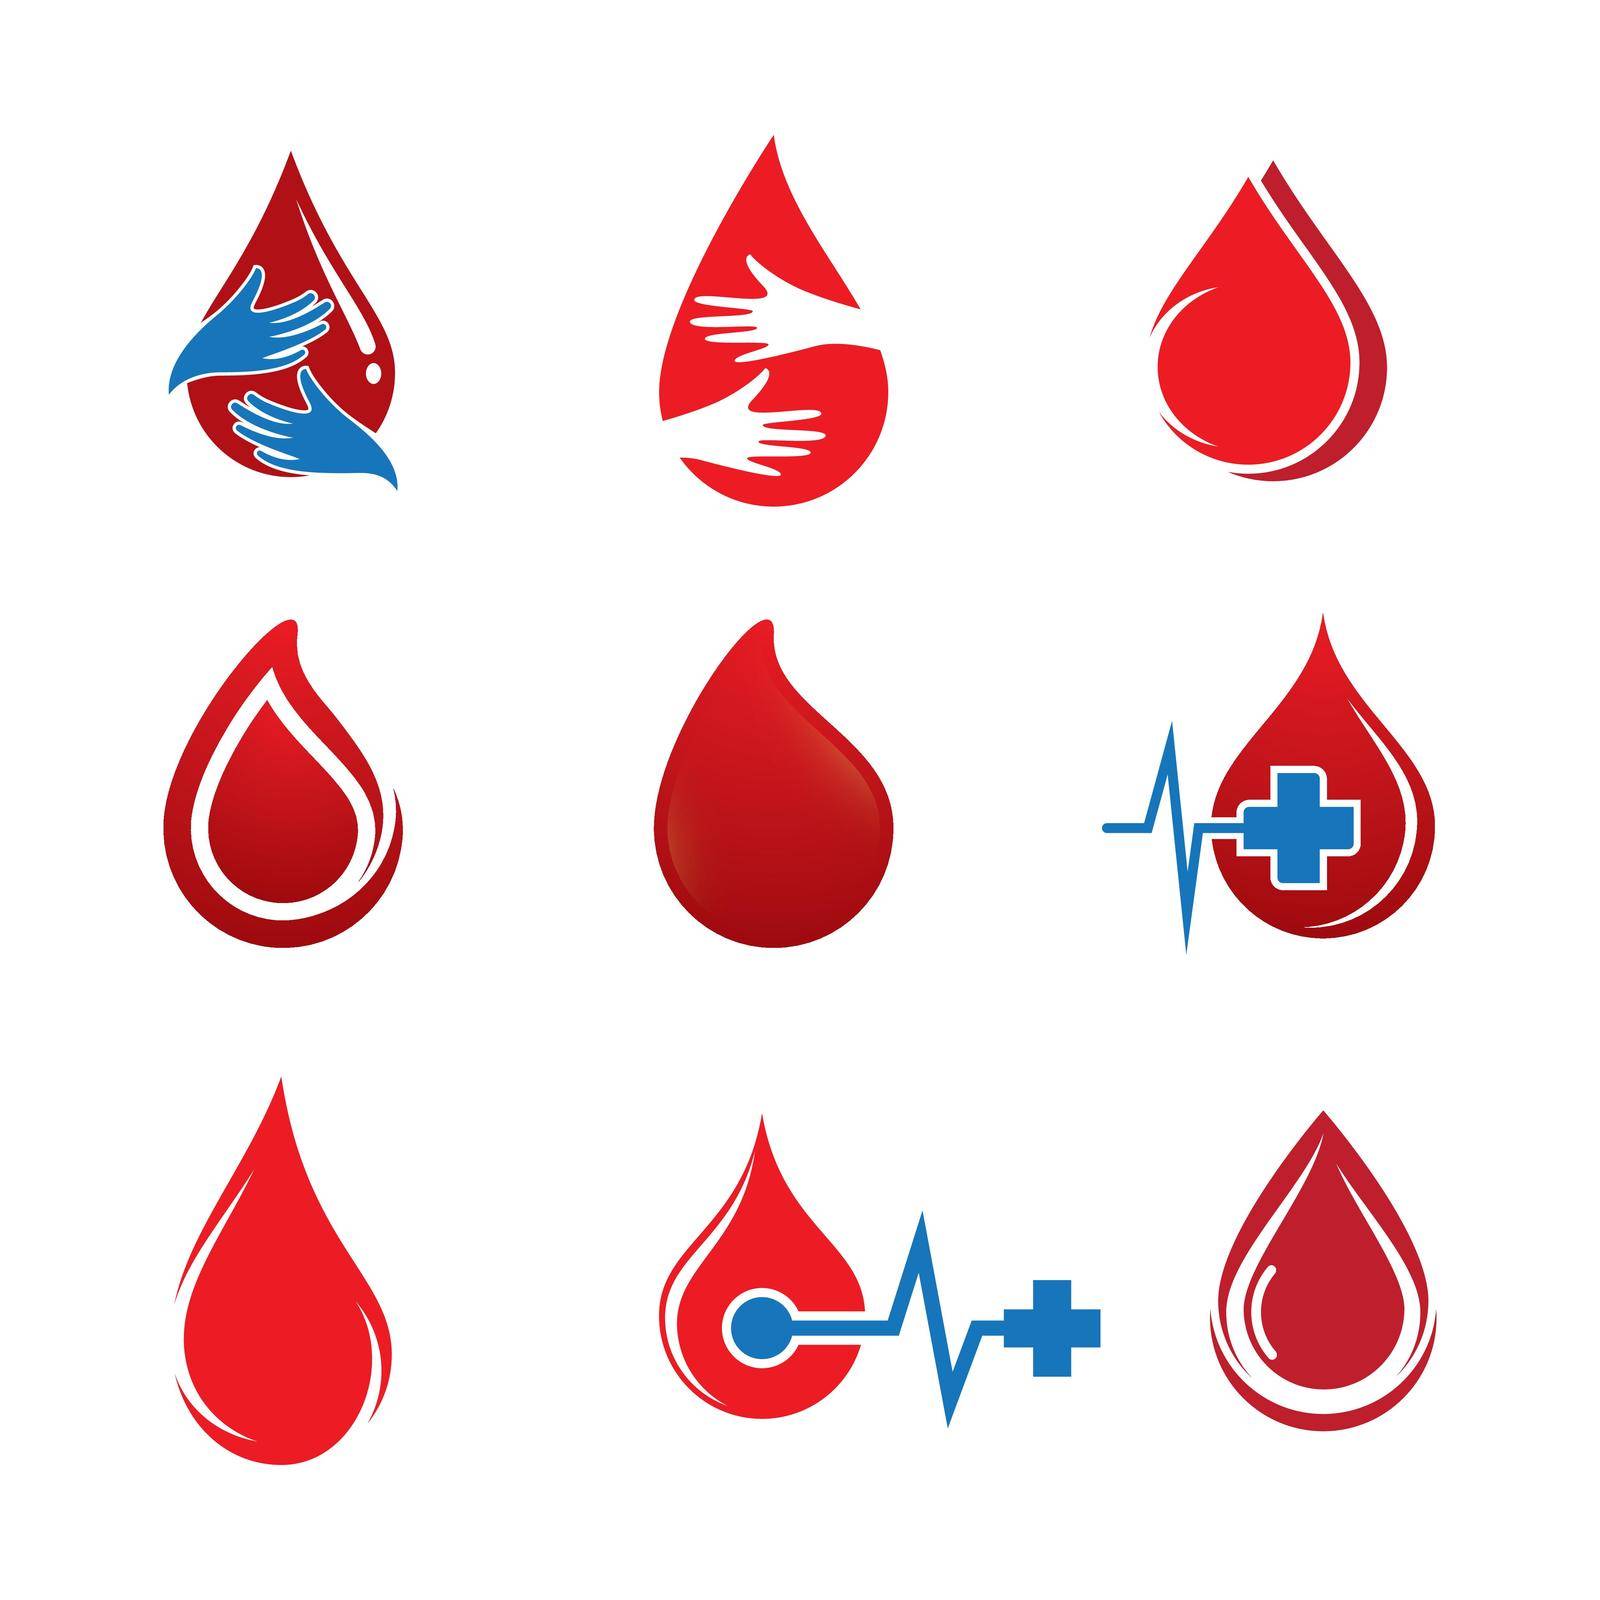 Blood vector icon by Fat17